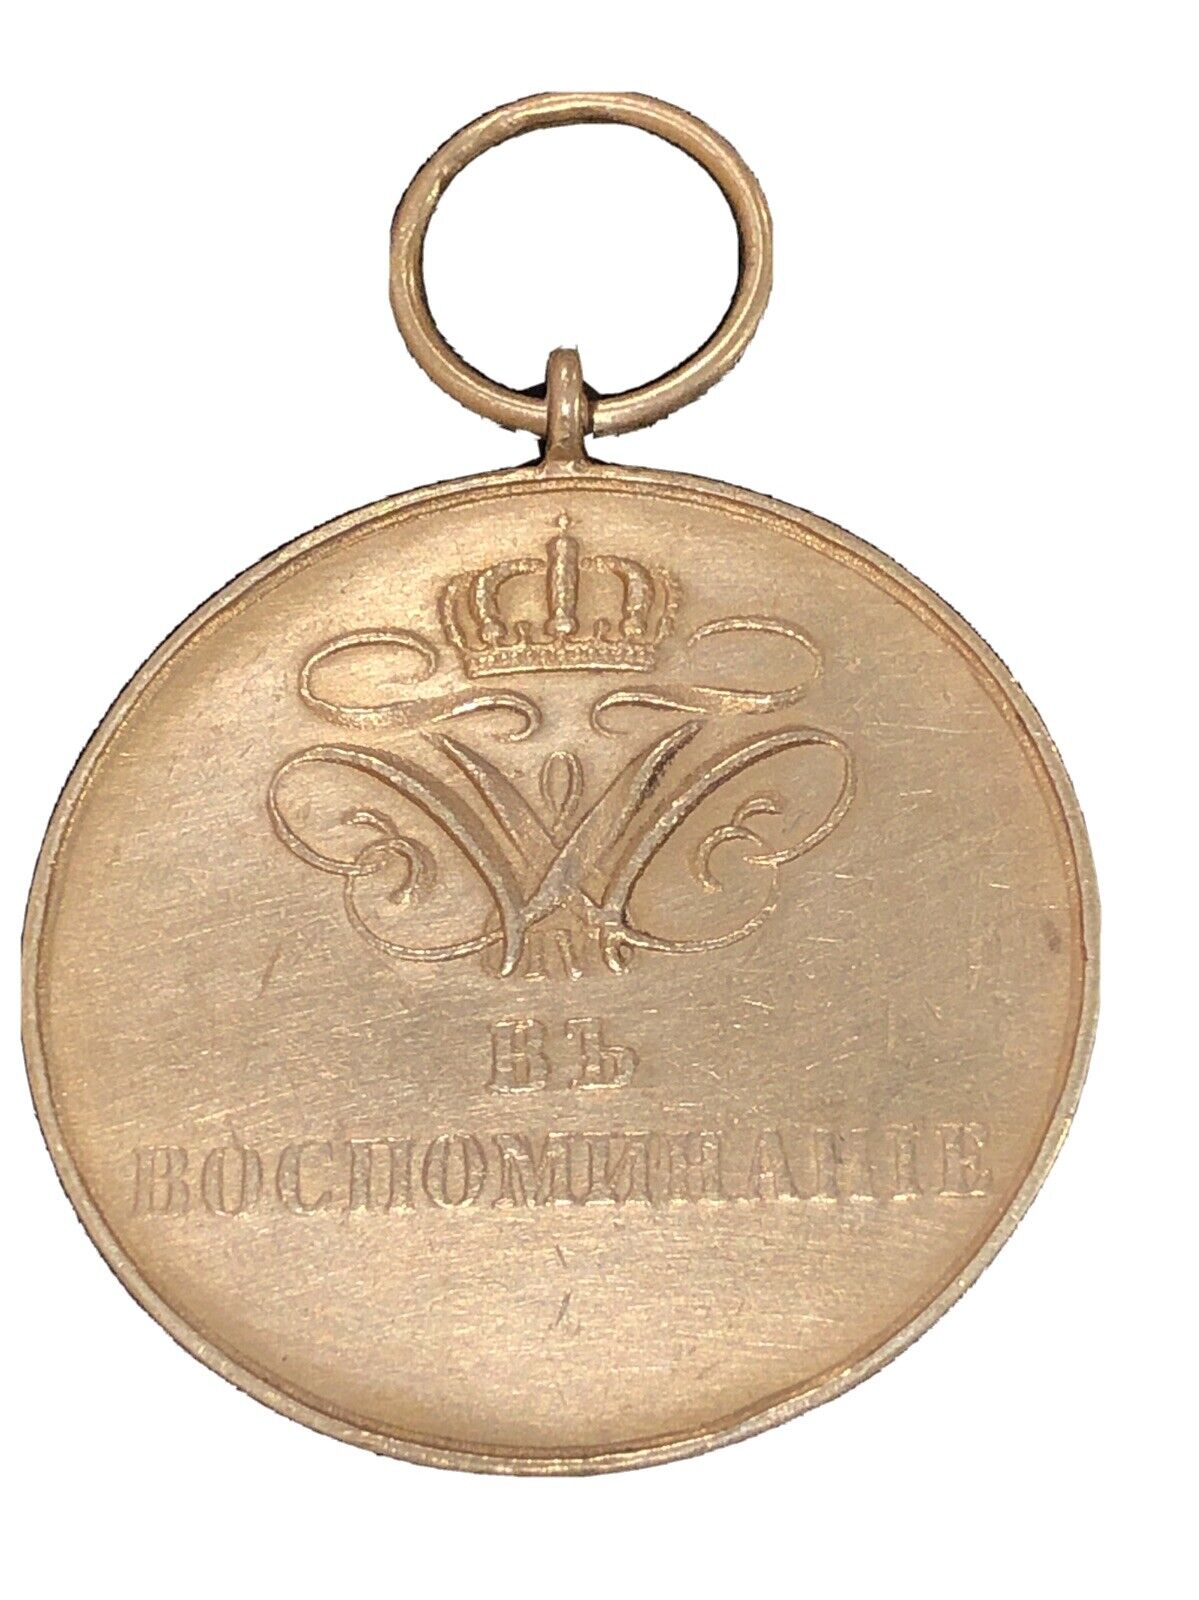 RUSSIA/PRUSSIA COMMEMORATIVE GOLD MEDAL OF 3rd GRENADIERS PERNOVSKY REGIMENT.